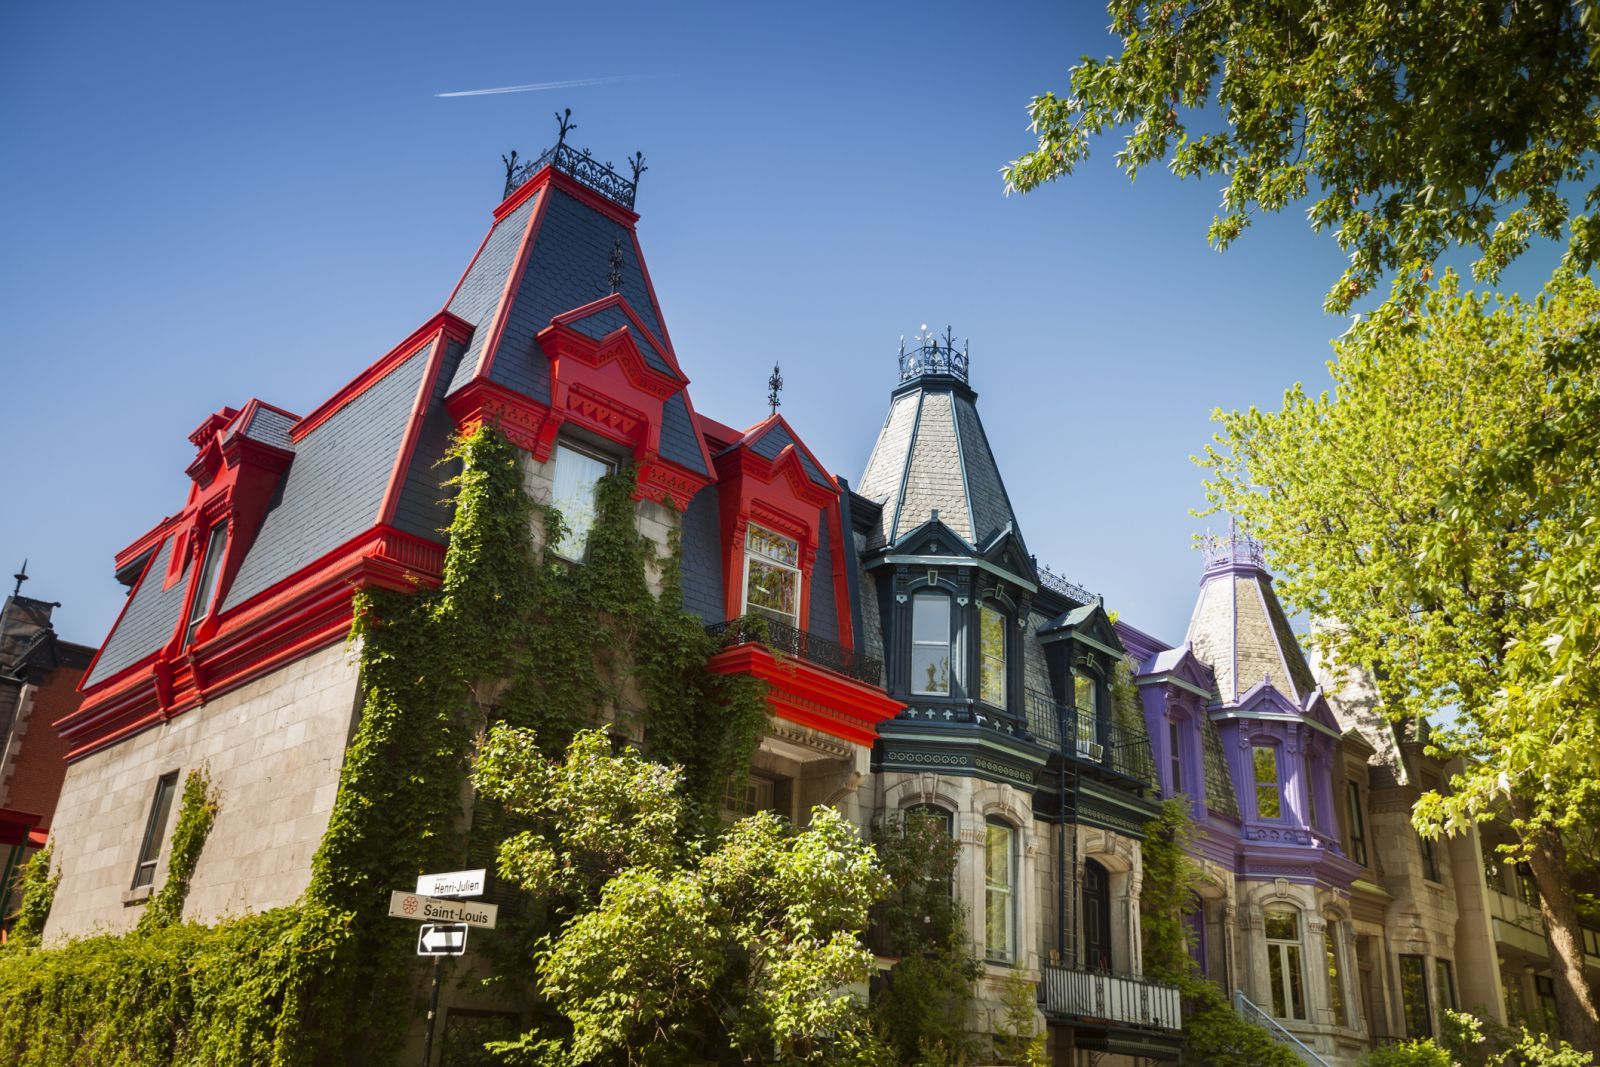 Stock image of housing in Montreal